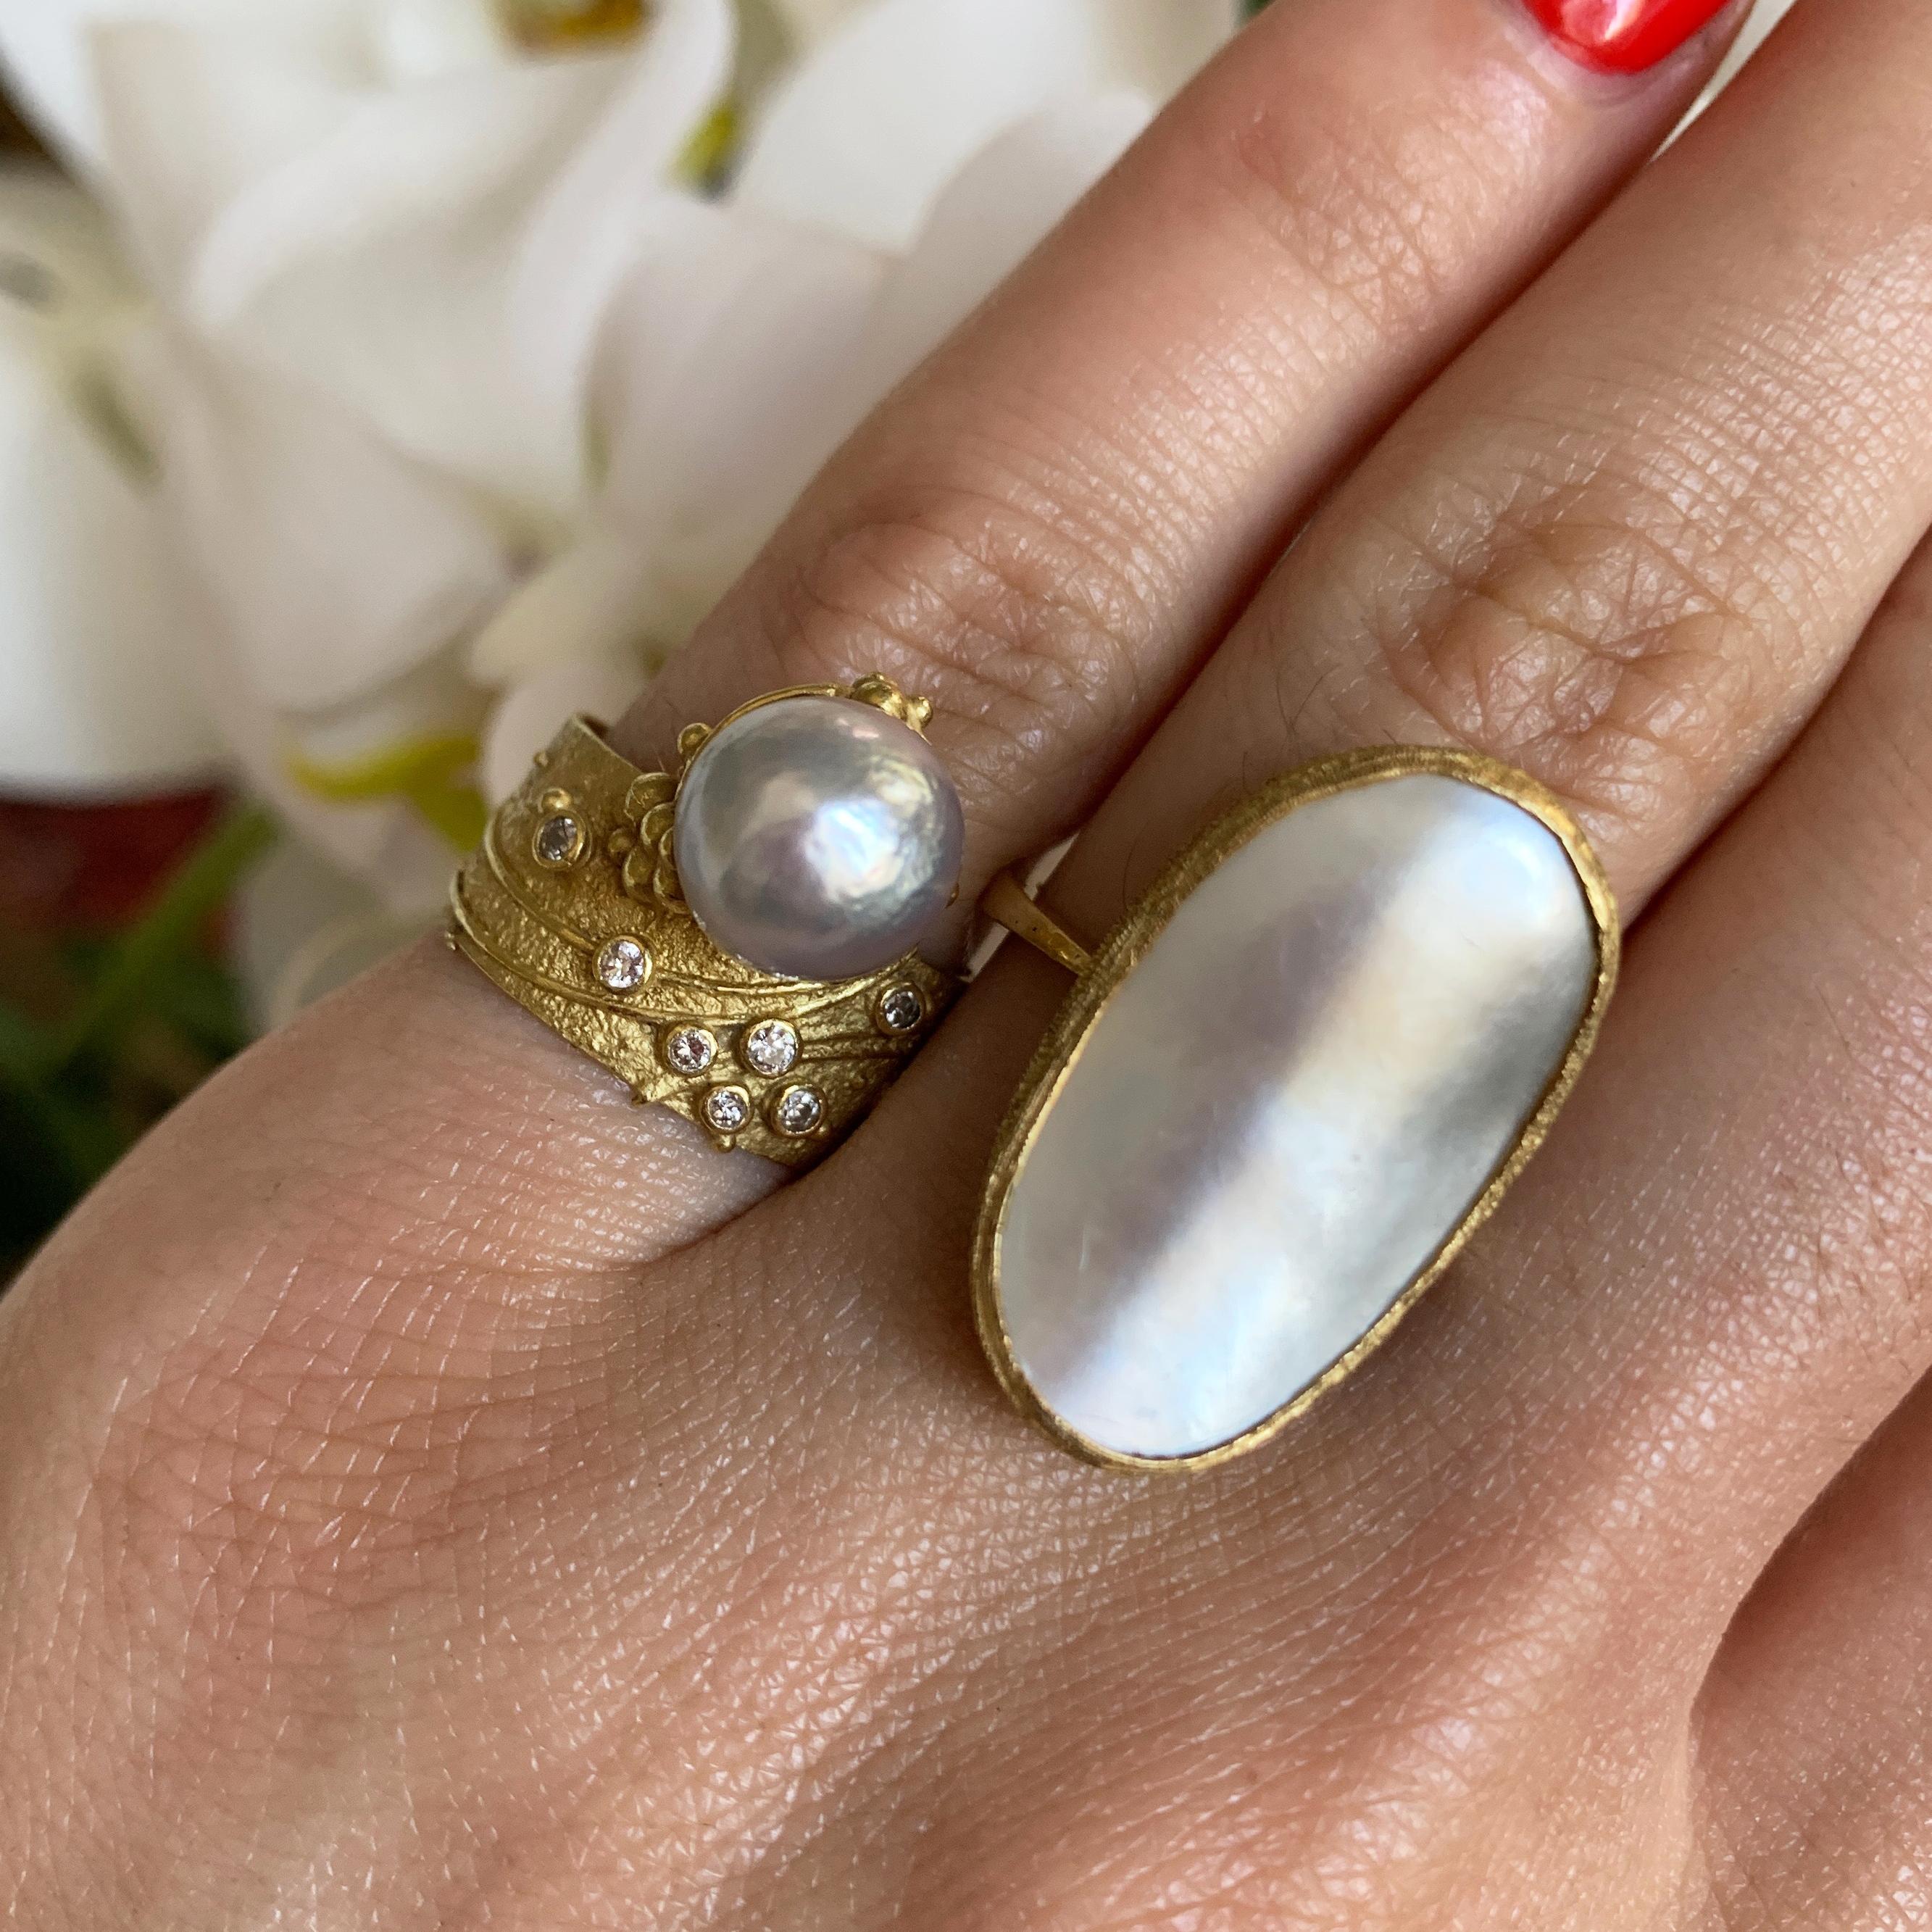 A vintage handmade and unique pearl, diamond and textured 18 karat yellow gold ring, by Gerda Flöckinger, United Kingdom, c. 1970. Signed GF. Ring is a size 6.25 and measures 0.70